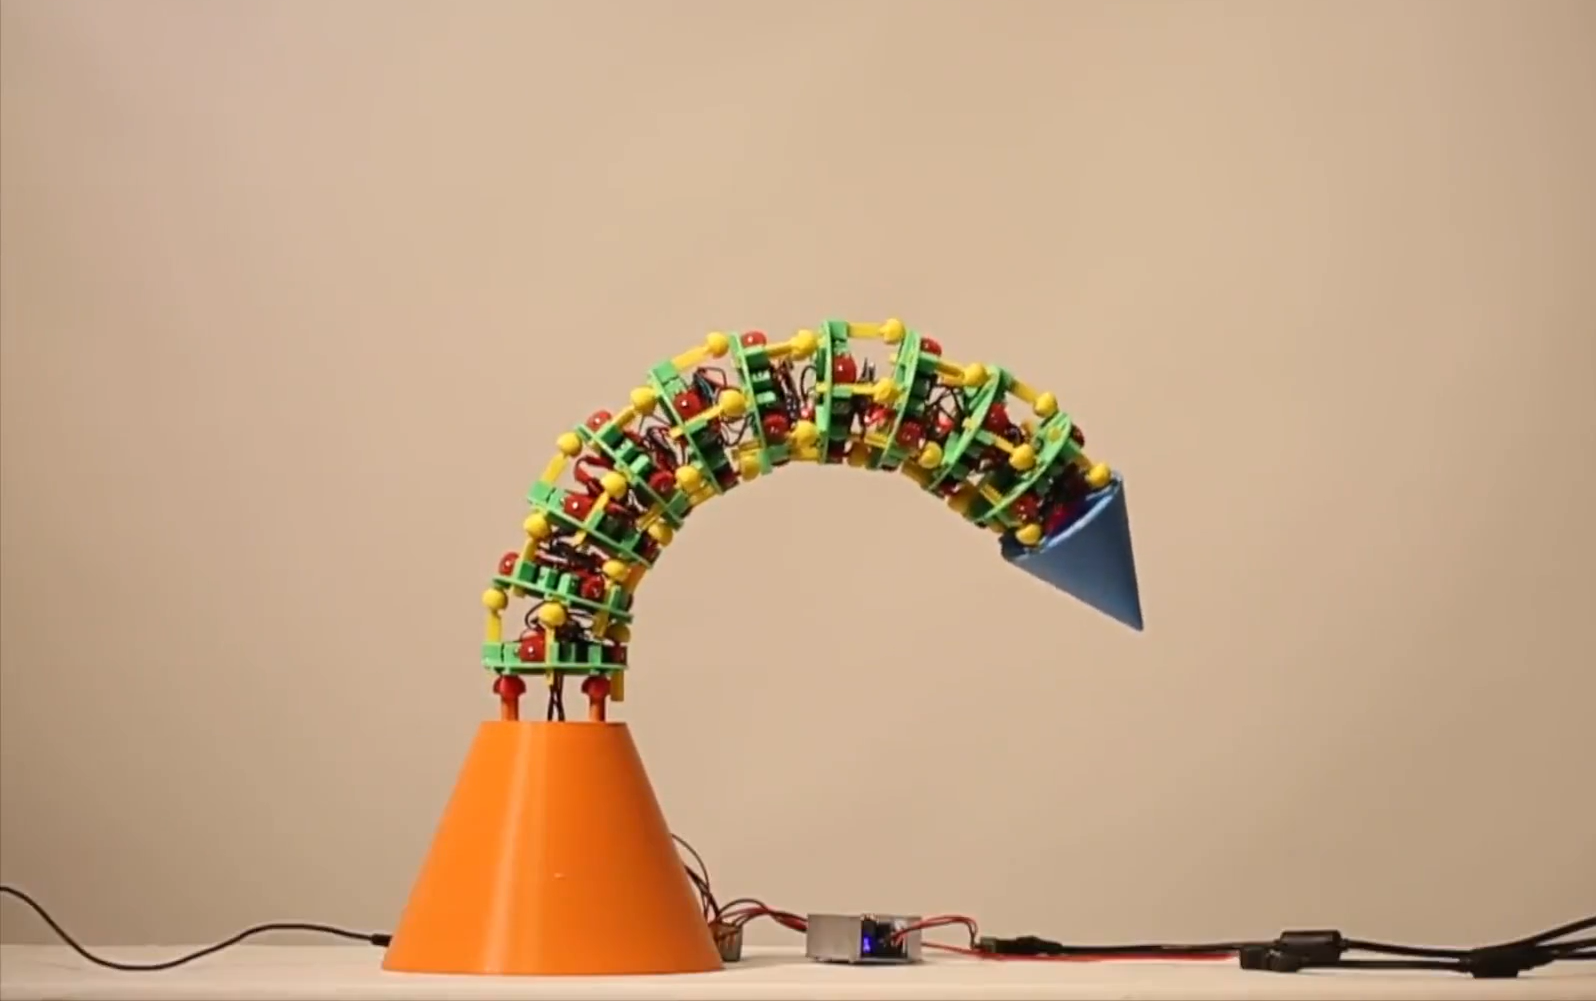 Scientists develop cheap ‘elephant trunk’ robot using 3D printing technology